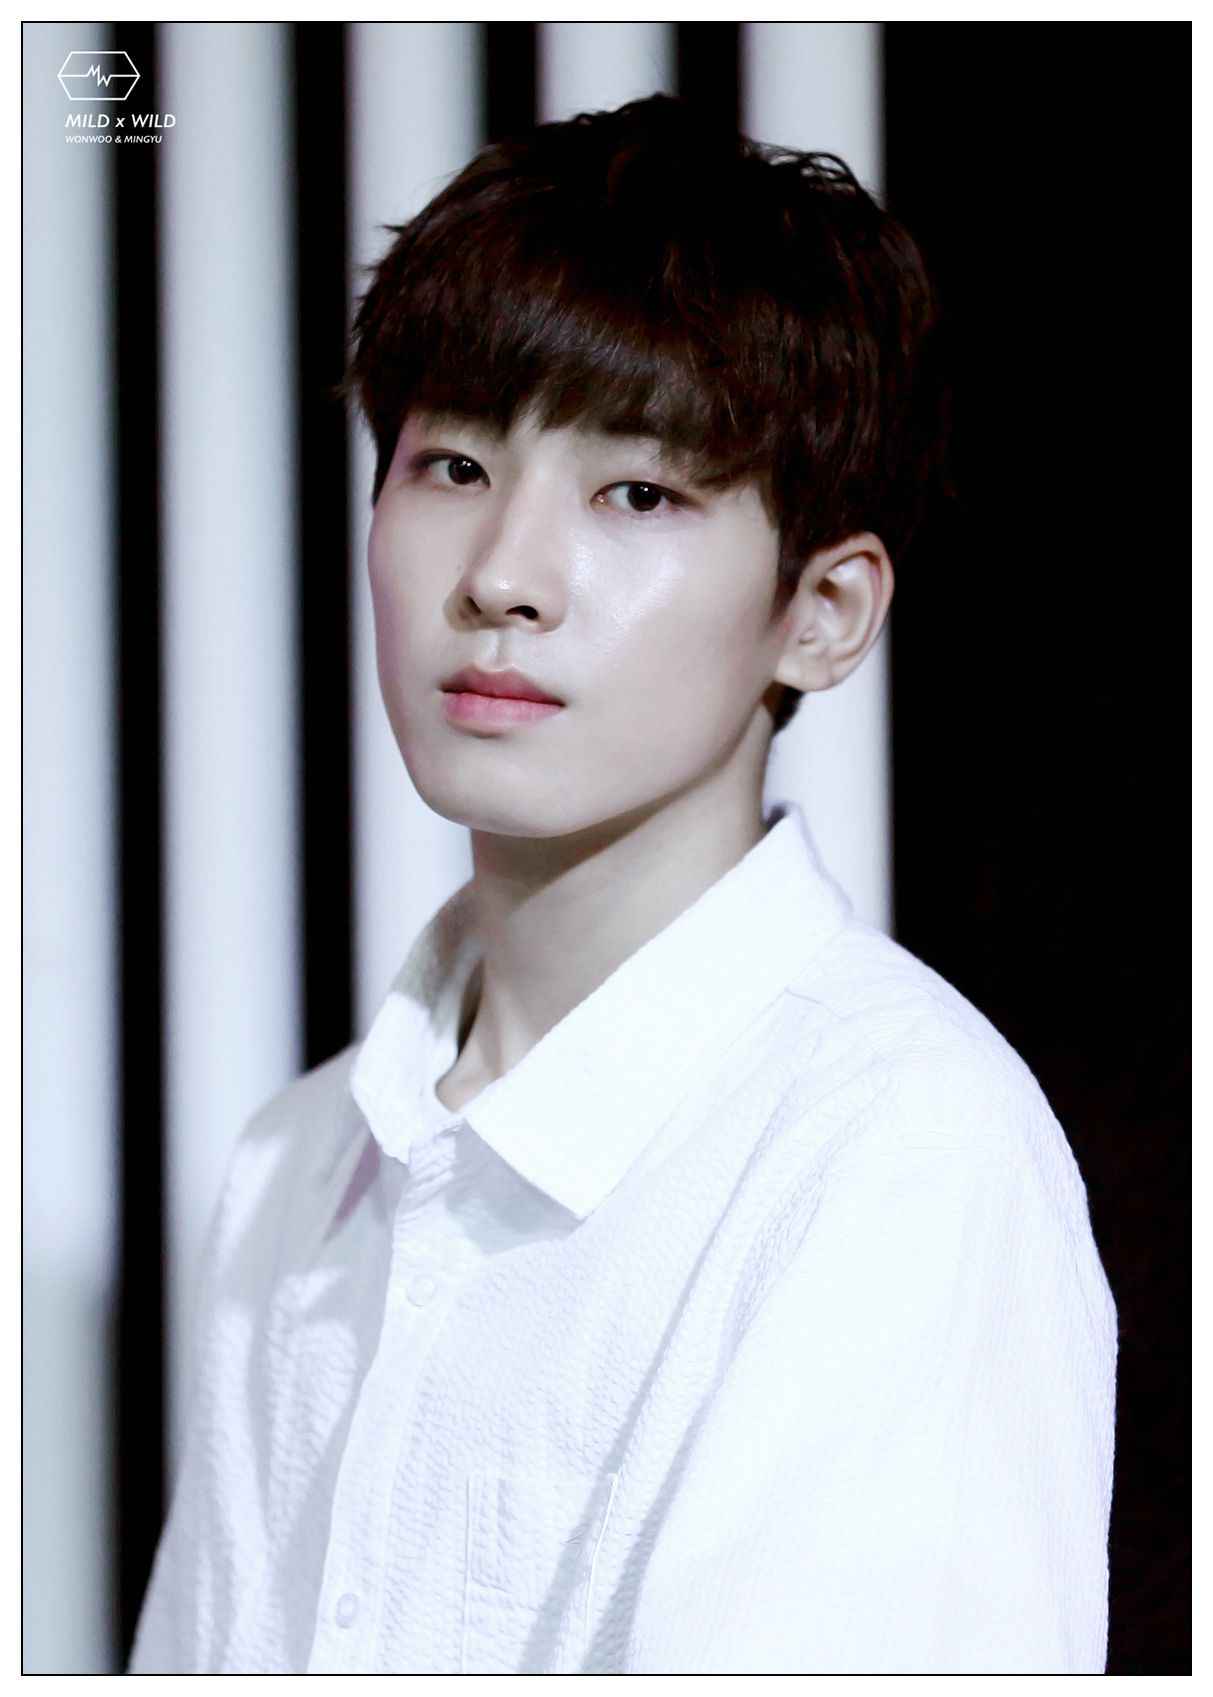 Seventeen WONWOO photo star Coated poster Painting Home Room Decor